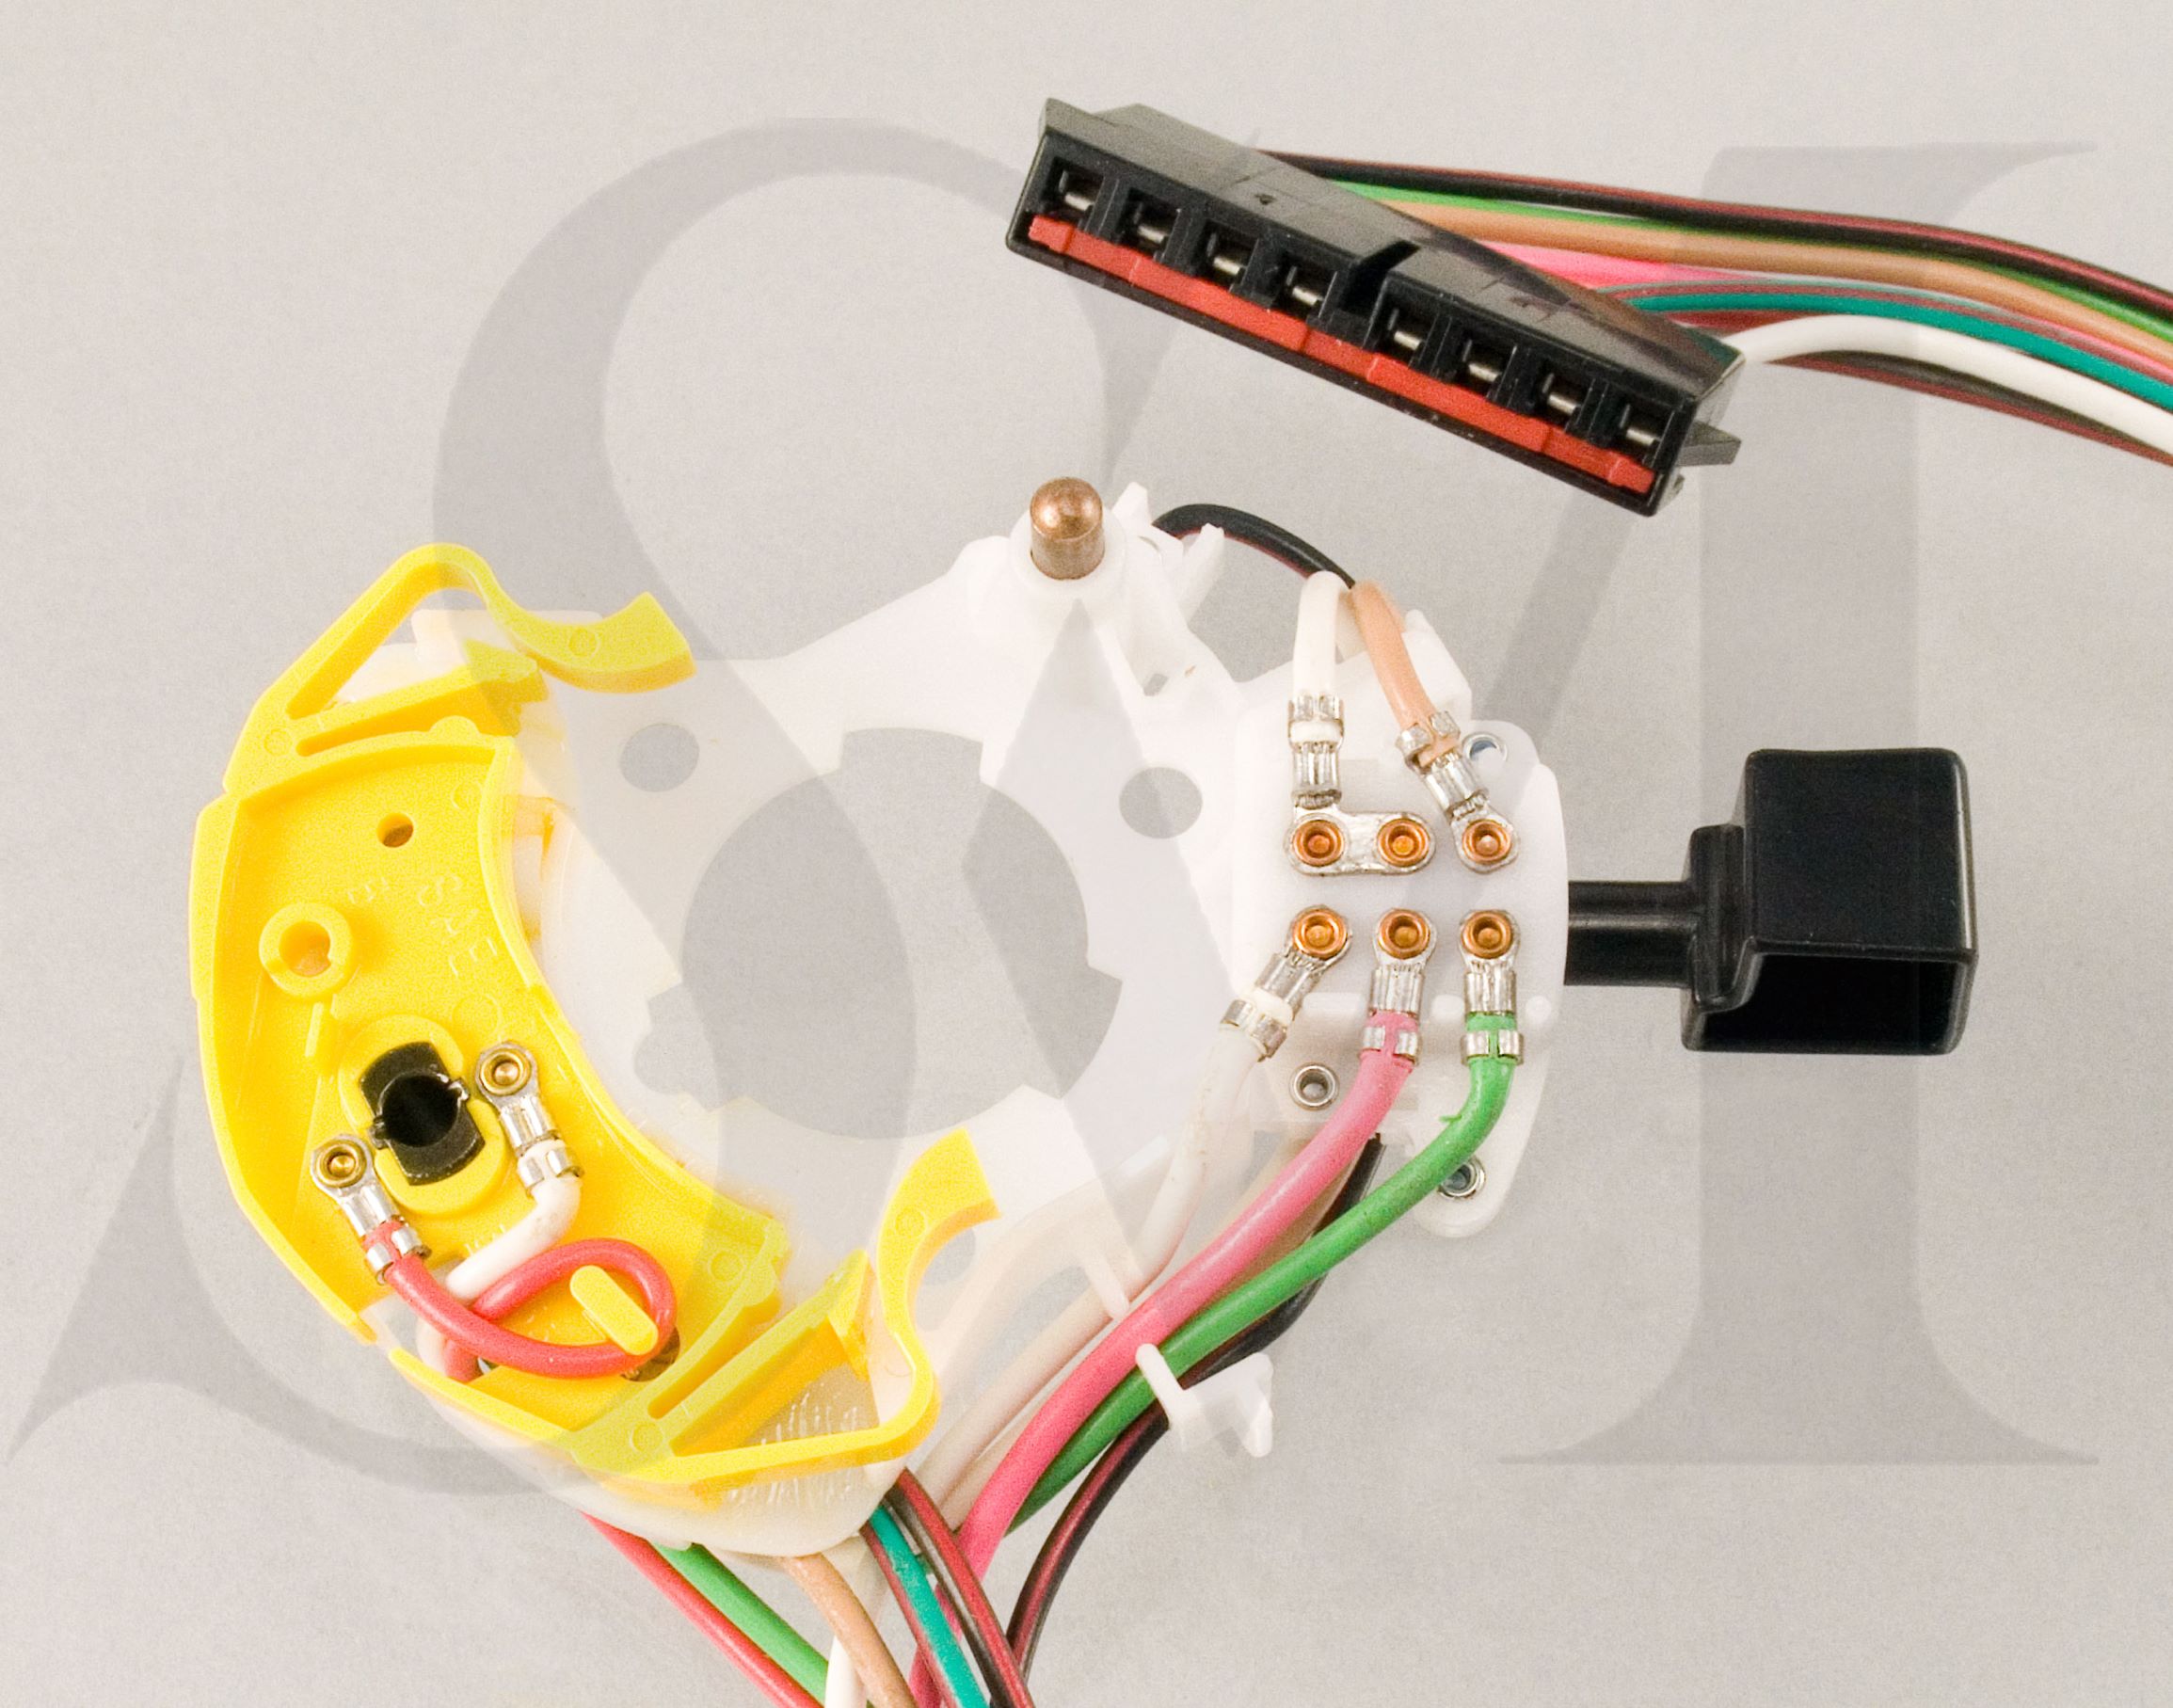 Product Photos: Turn Signal Switches – www.Shee-Mar.com